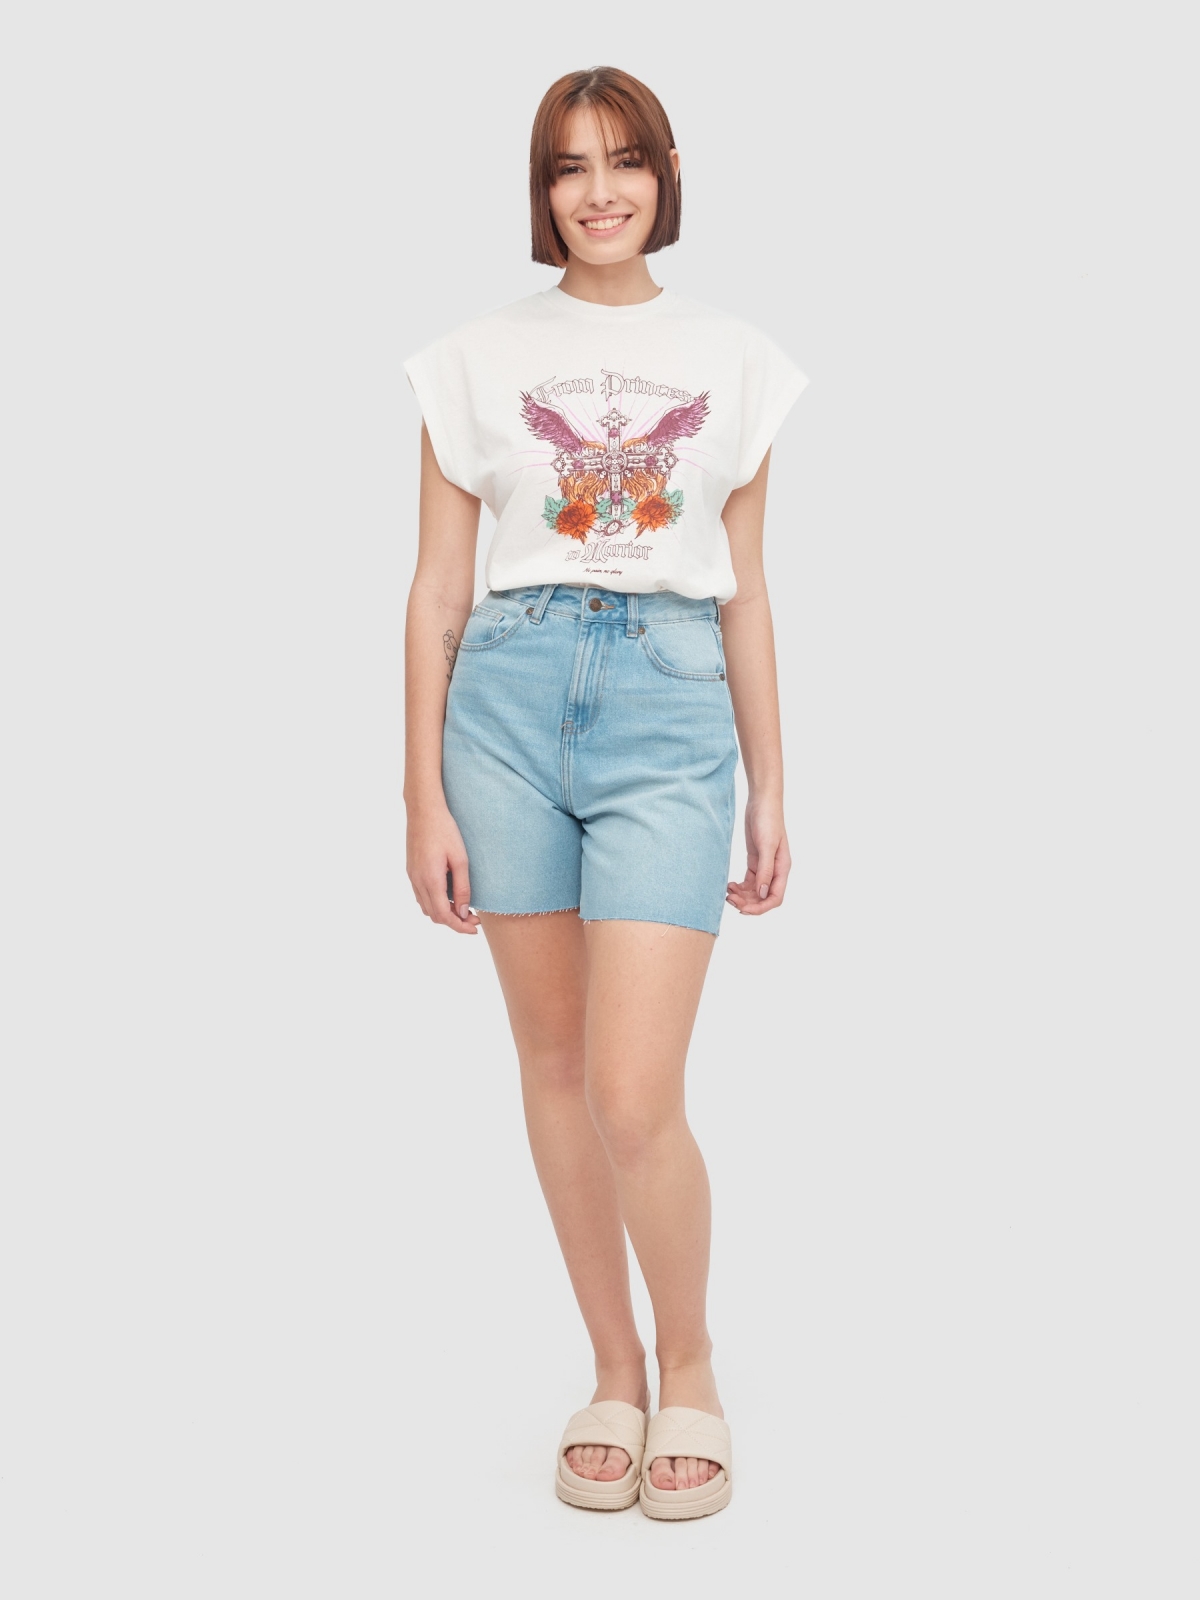 T-shirt oversize From Princess off white vista geral frontal